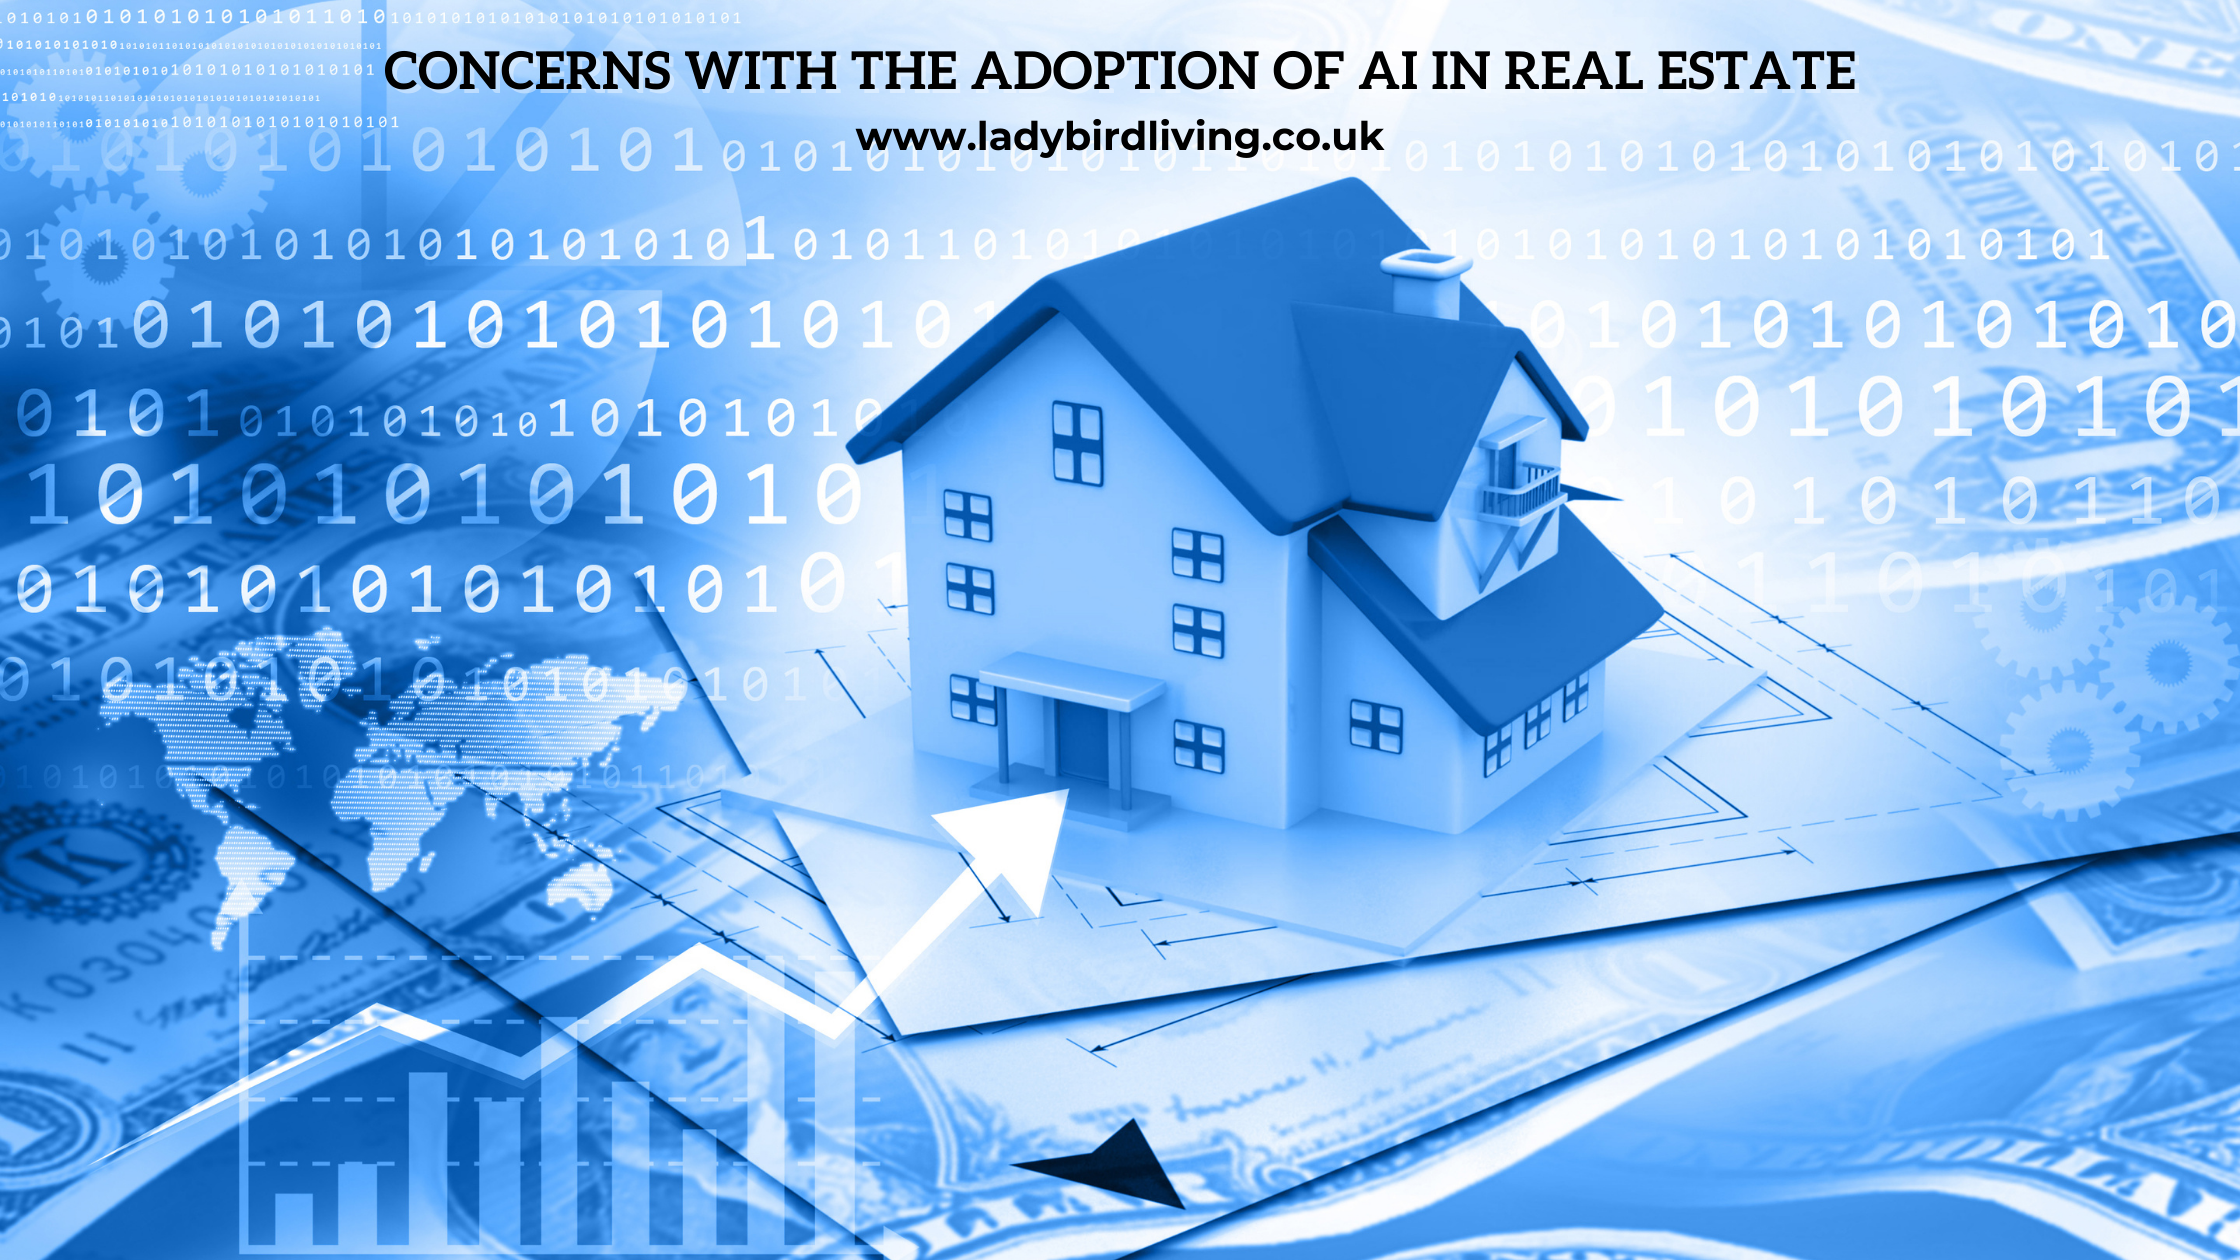 Concerns with the adoption of AI in real estate